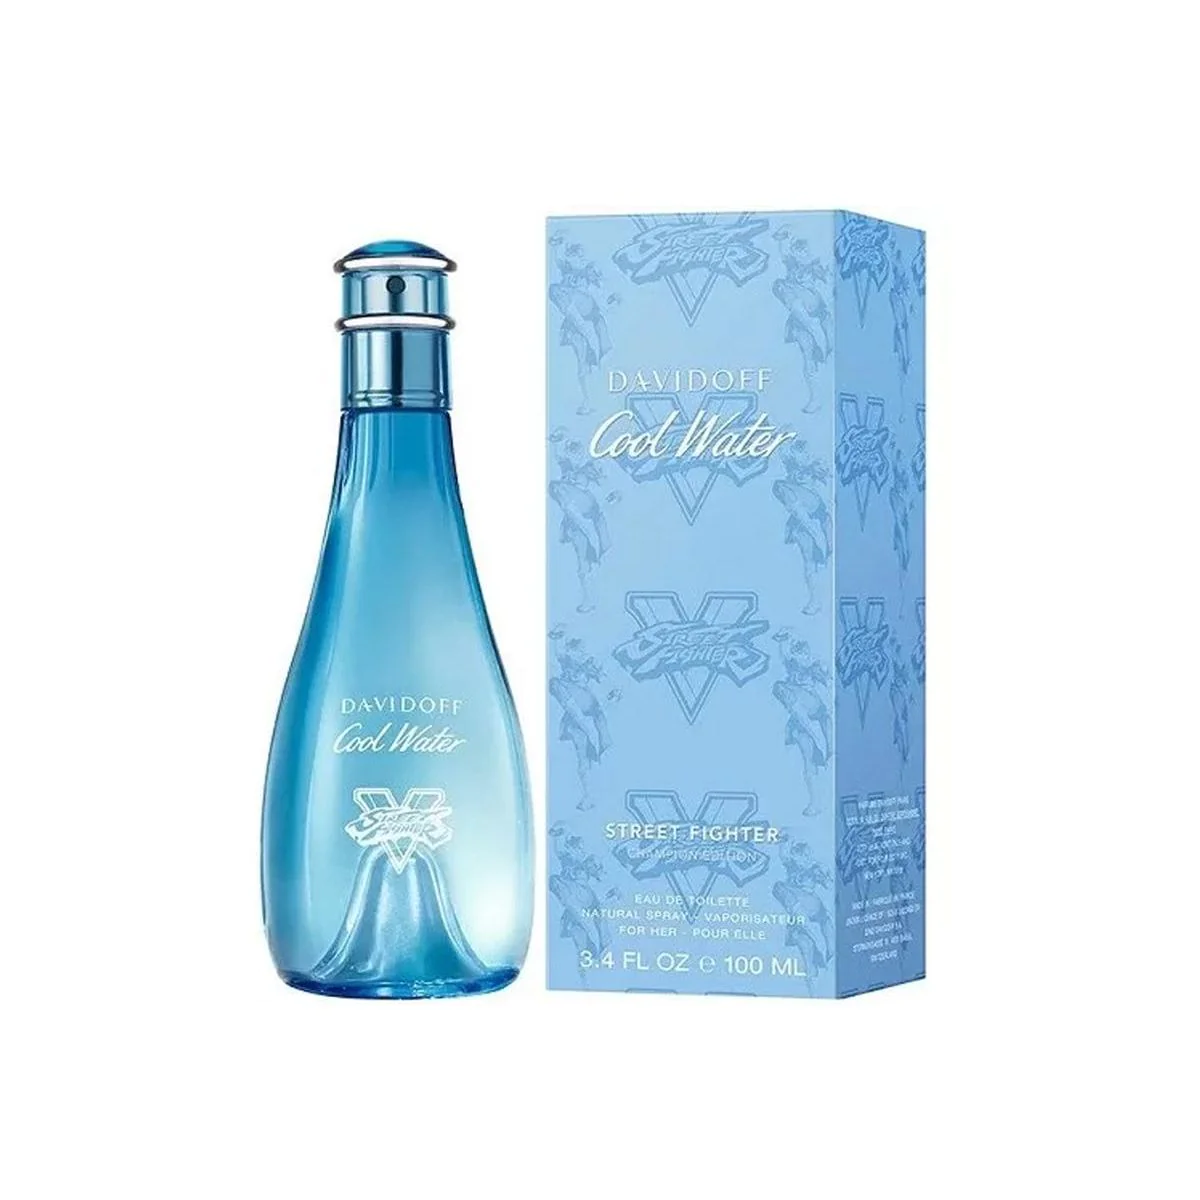 Image of Davidoff Cool Water Street Fighter - Edt 100 ml woman